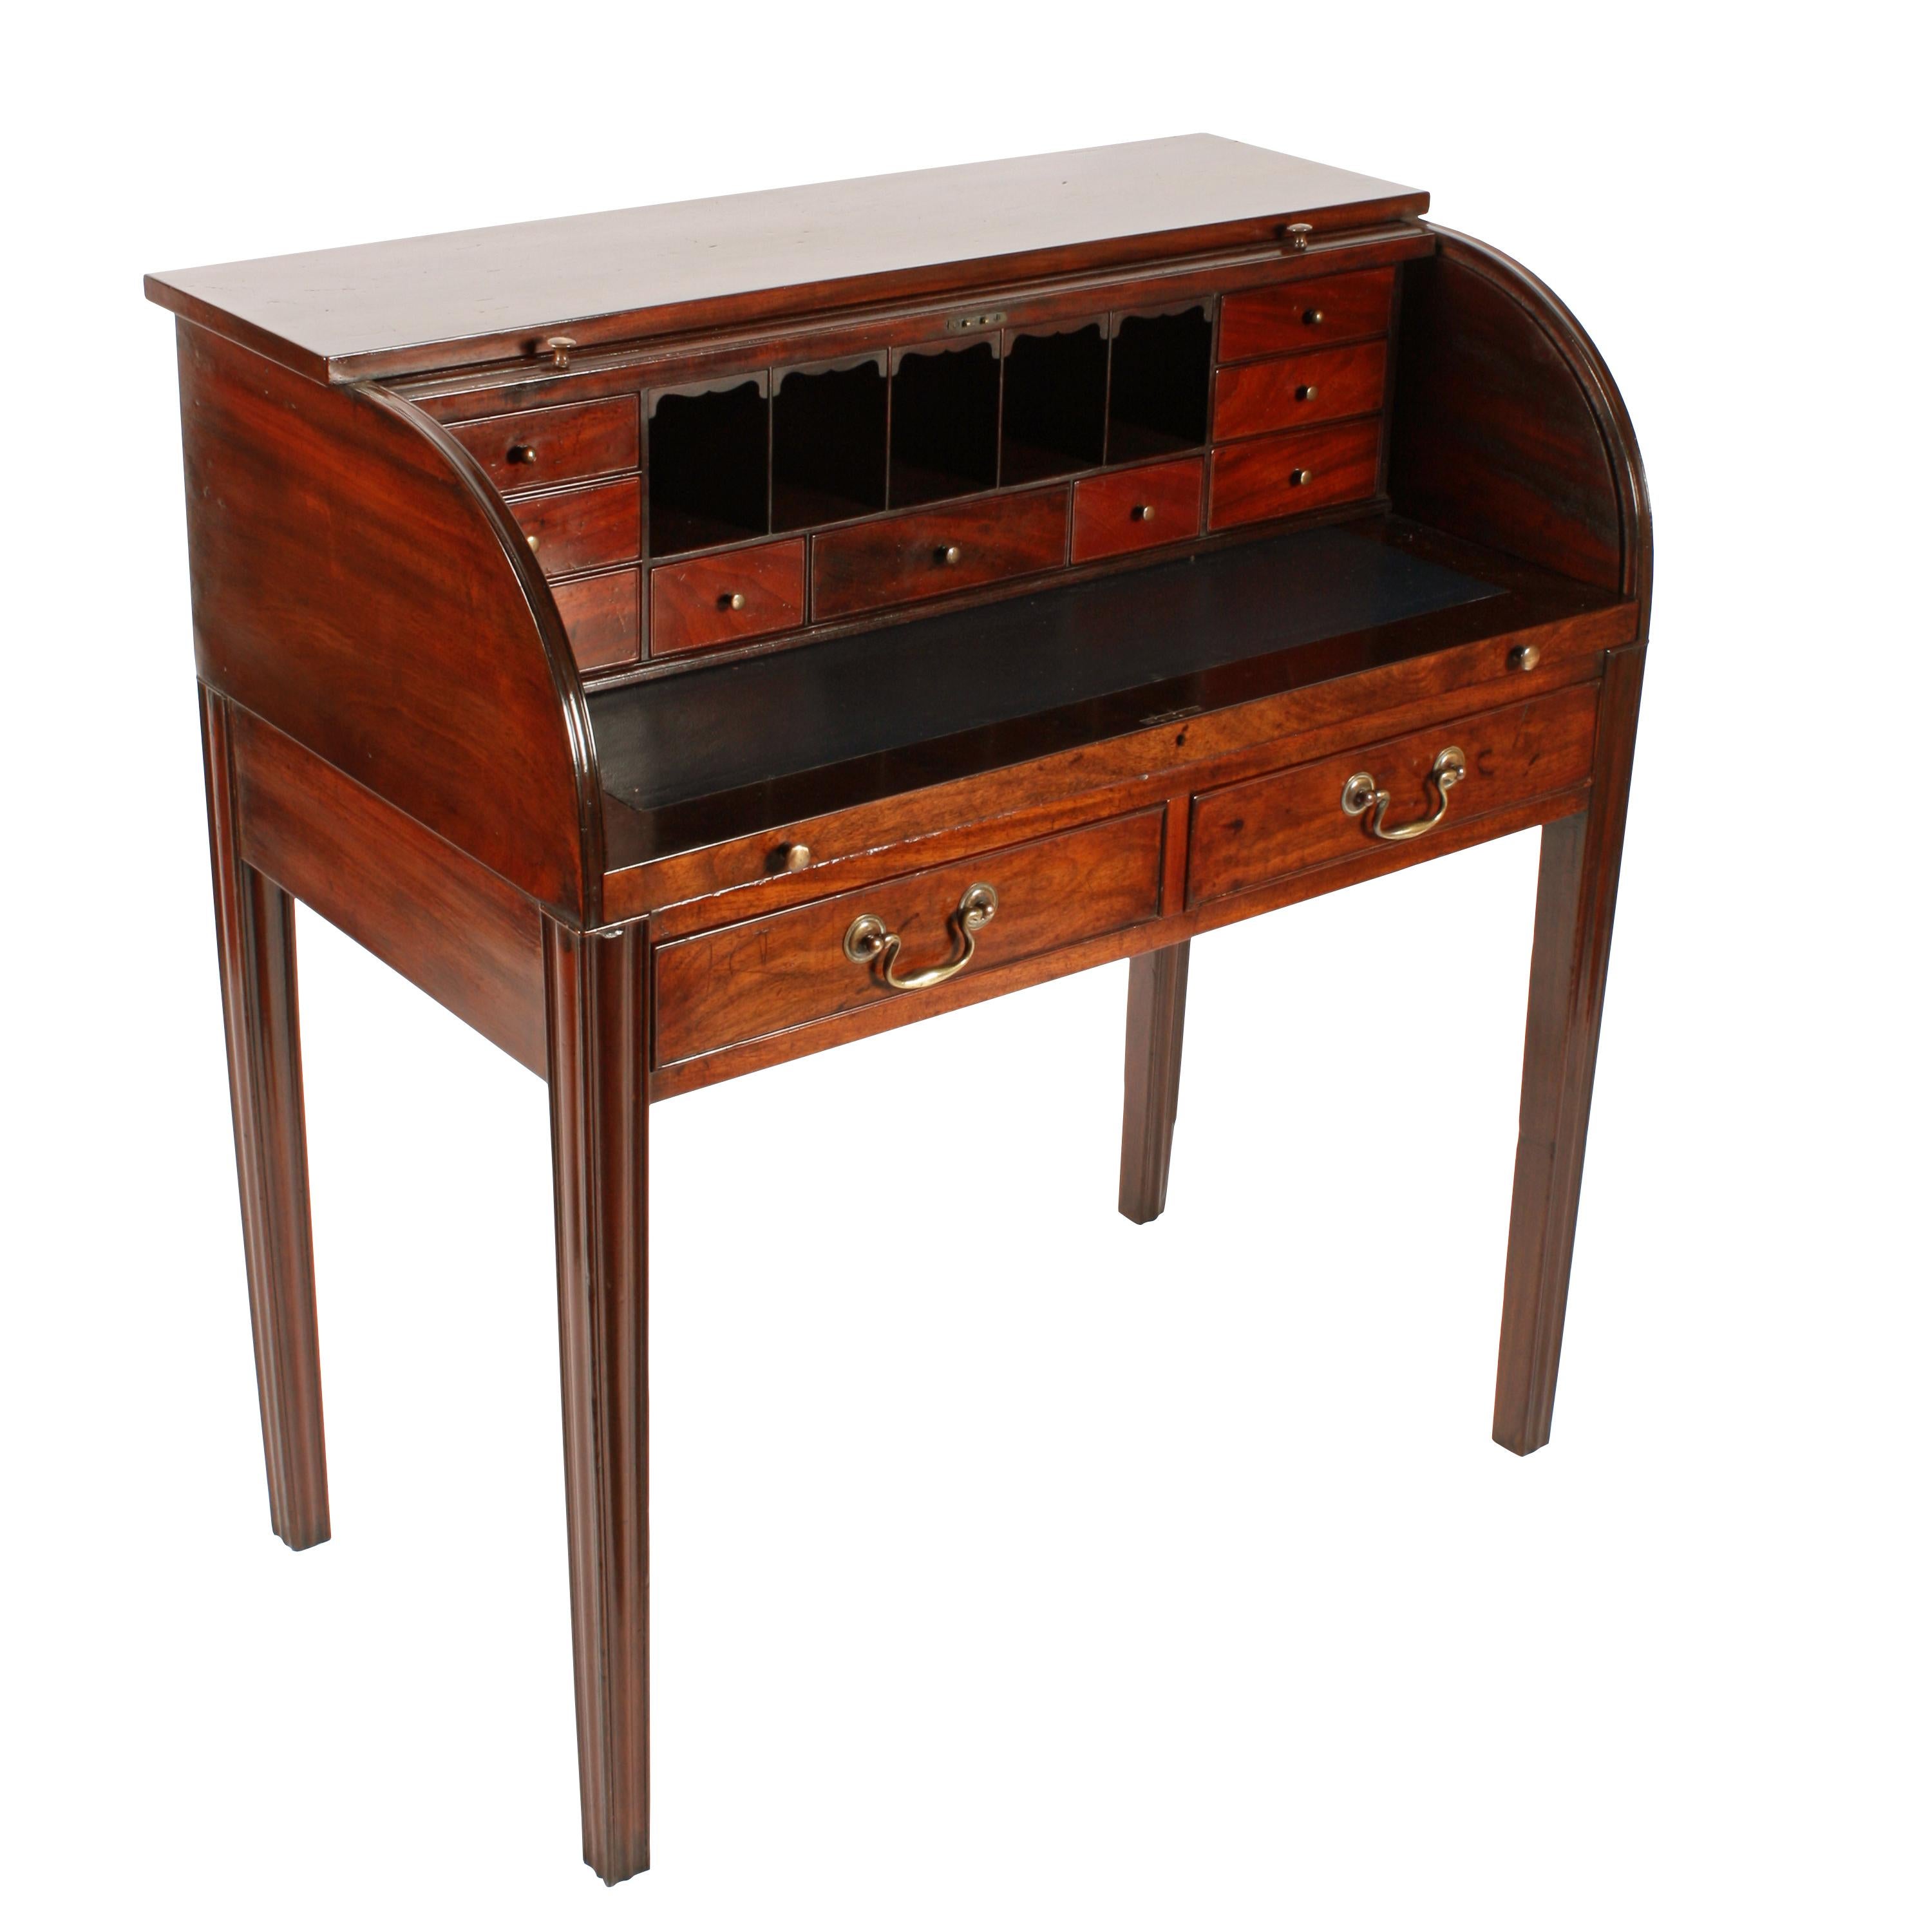 A Georgian mahogany cylinder desk by Gillows of Lancaster.

The desk has two drawers, a slatted mahogany tambour rolling lid, a slide forward writing surface, nine internal drawers and five pigeon holes.

The internal drawers are mahogany